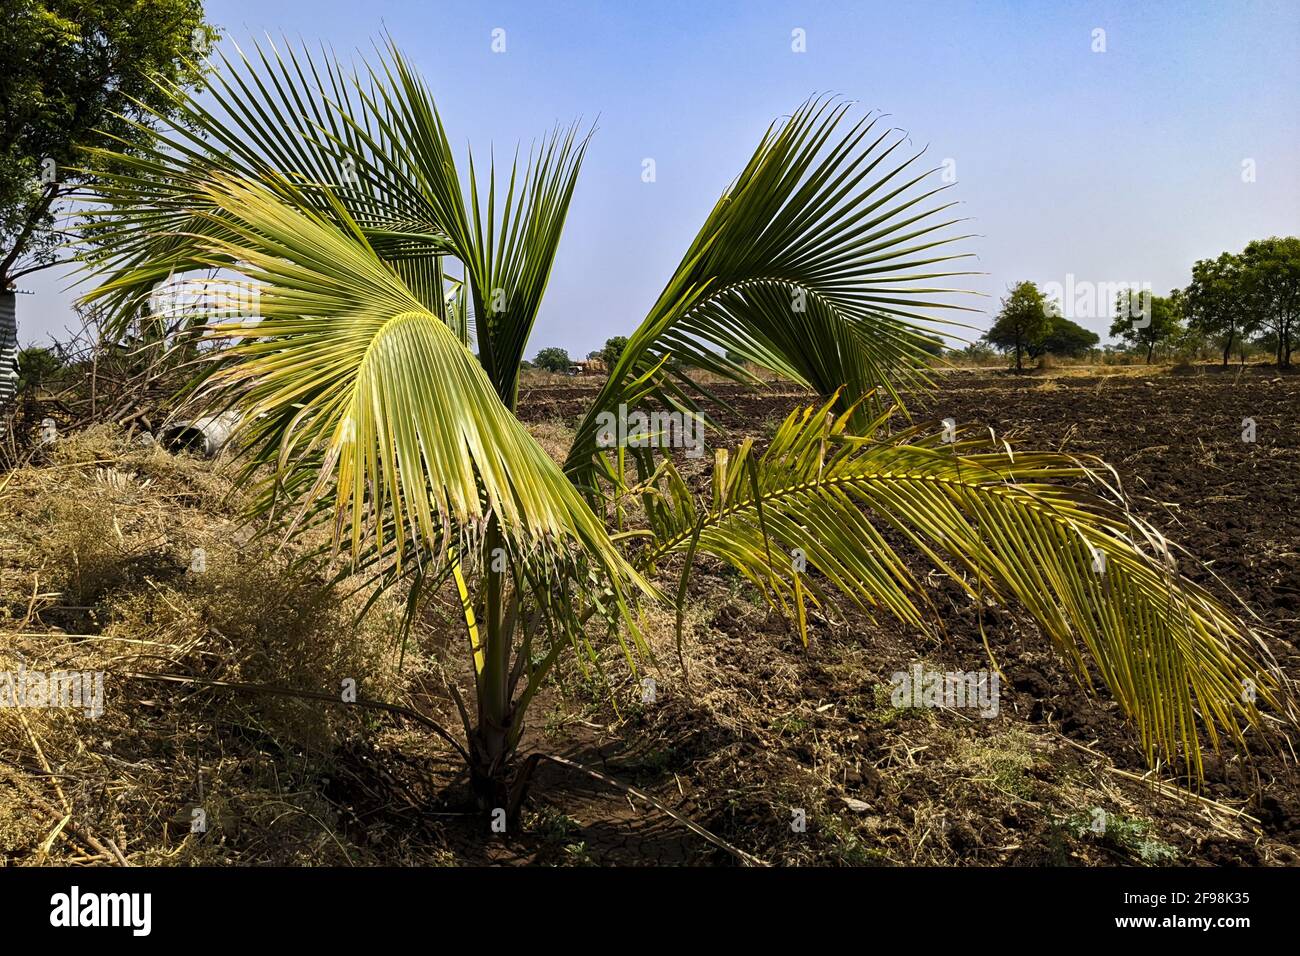 Green Raffia palm grown in a tropical area on a sunny day Stock Photo